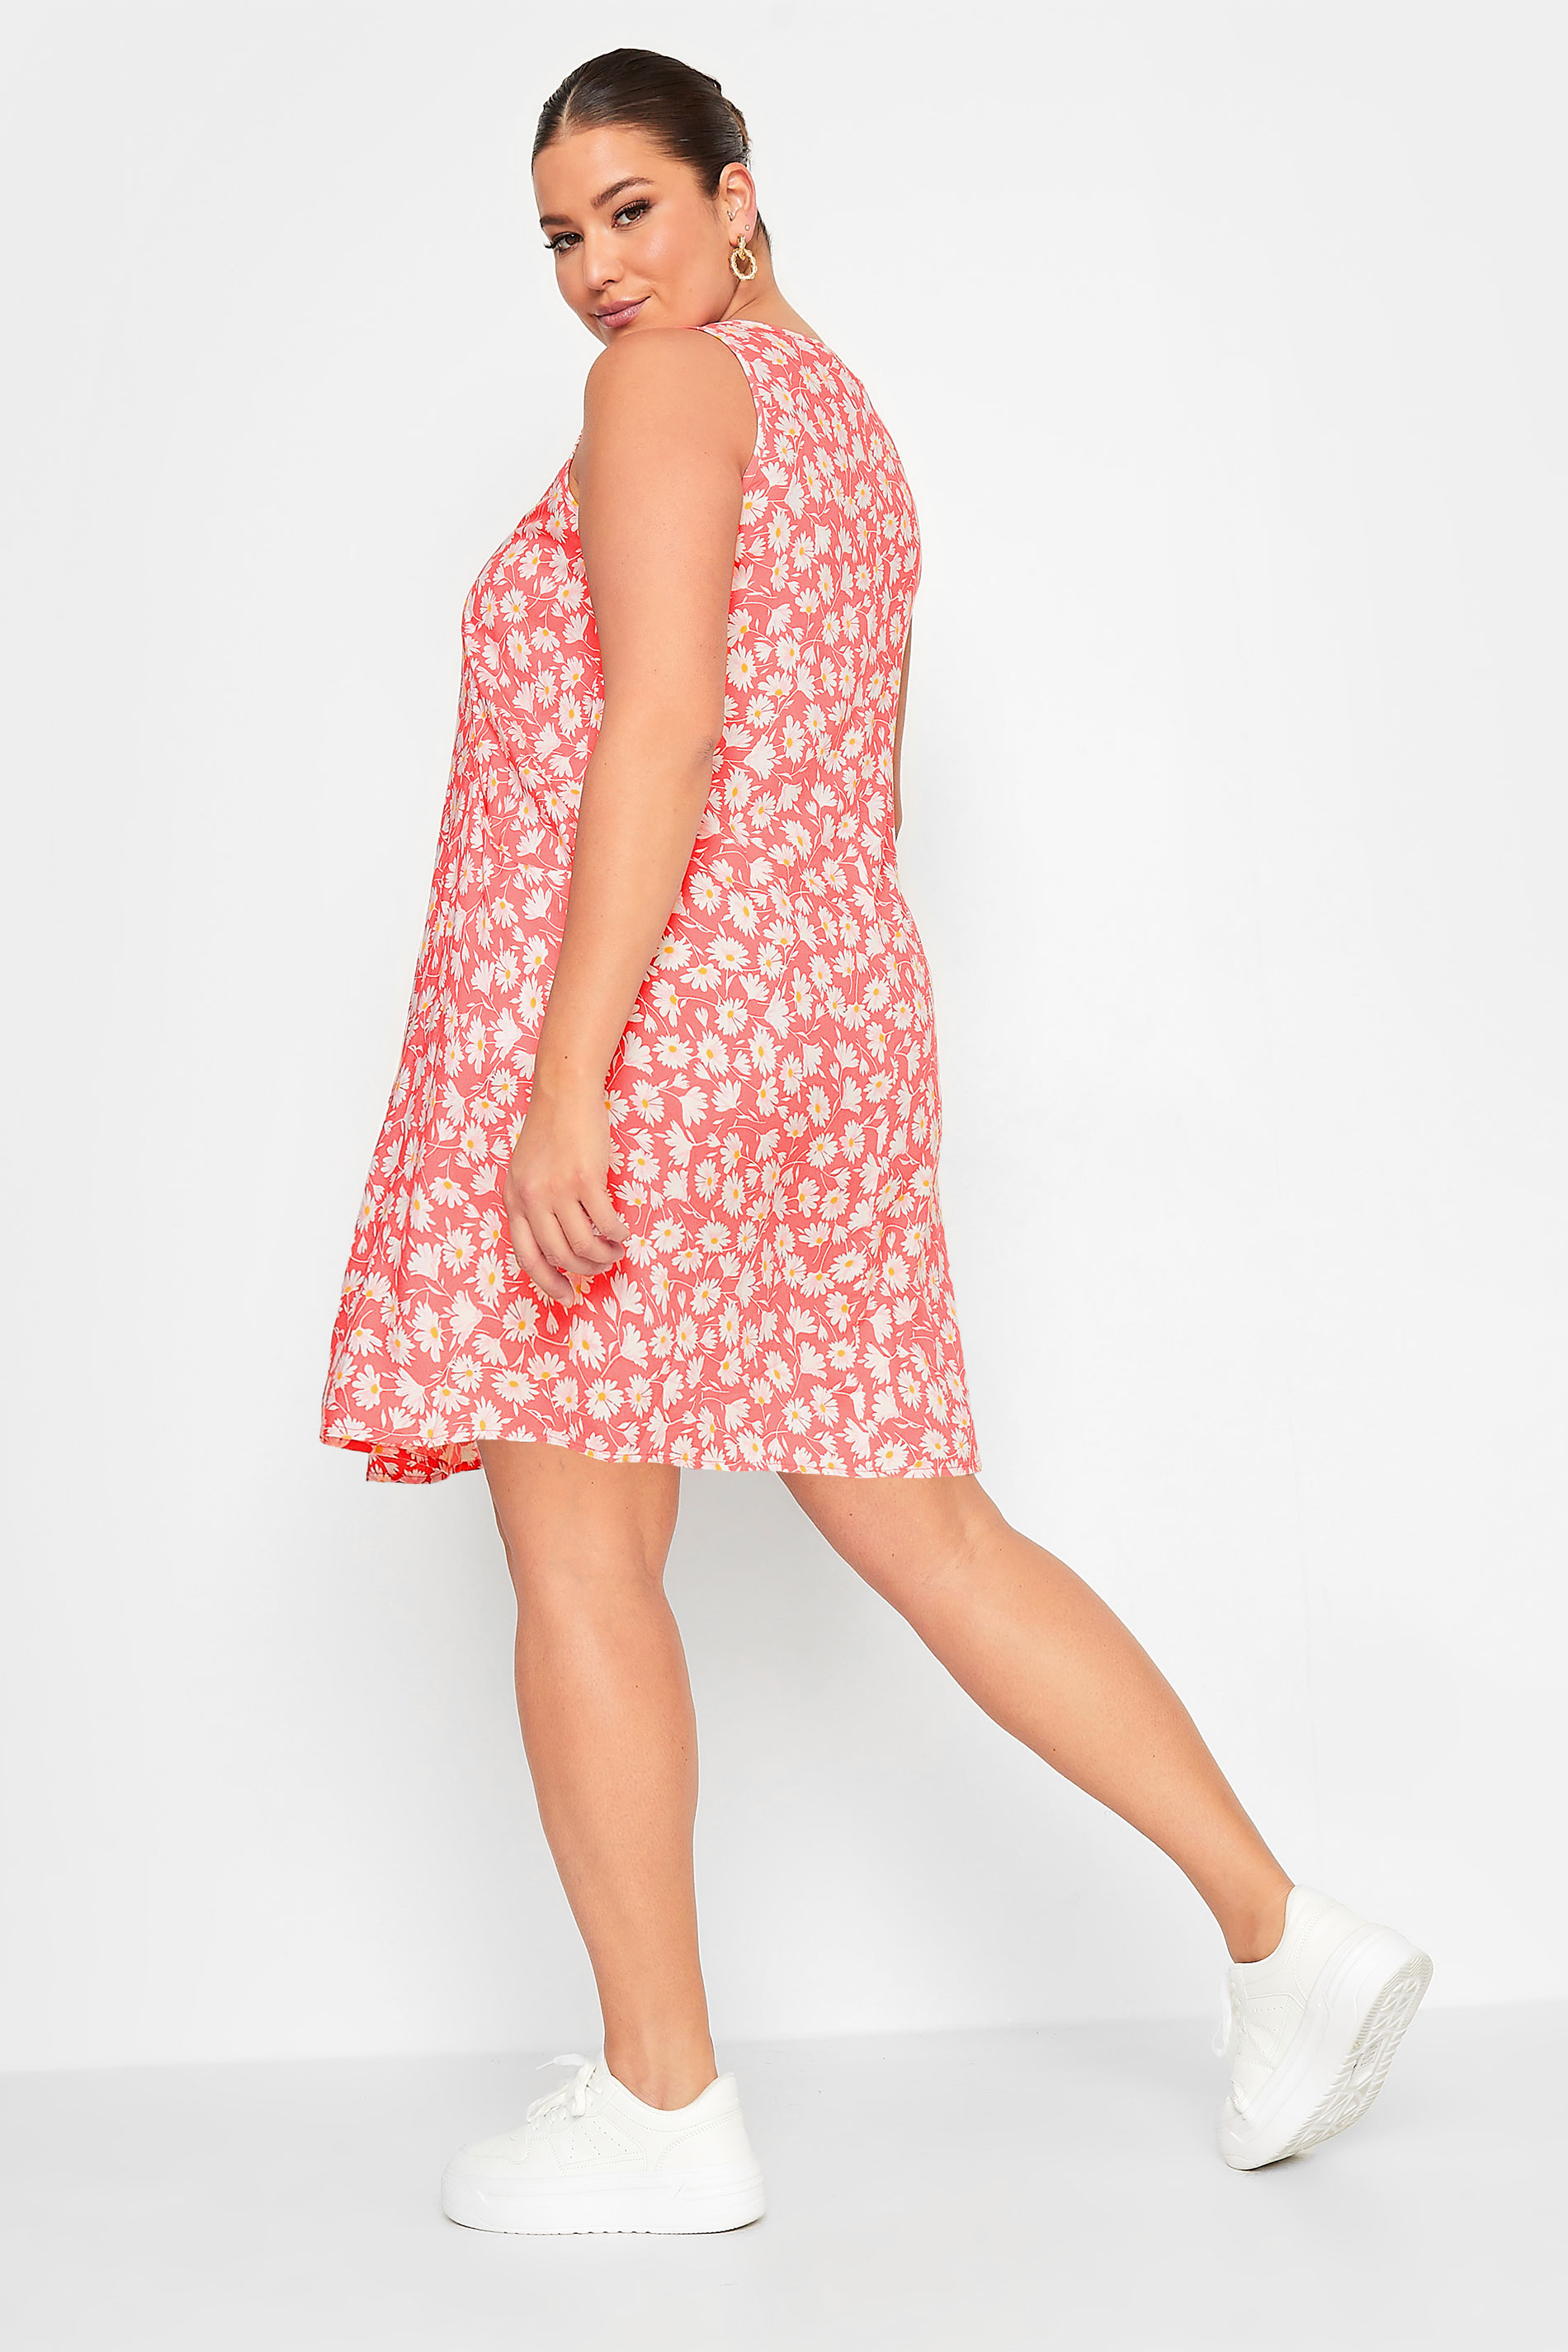 YOURS Plus Size Curve Light Pink Daisy Print Pocket Smock Dress | Yours Clothing  3